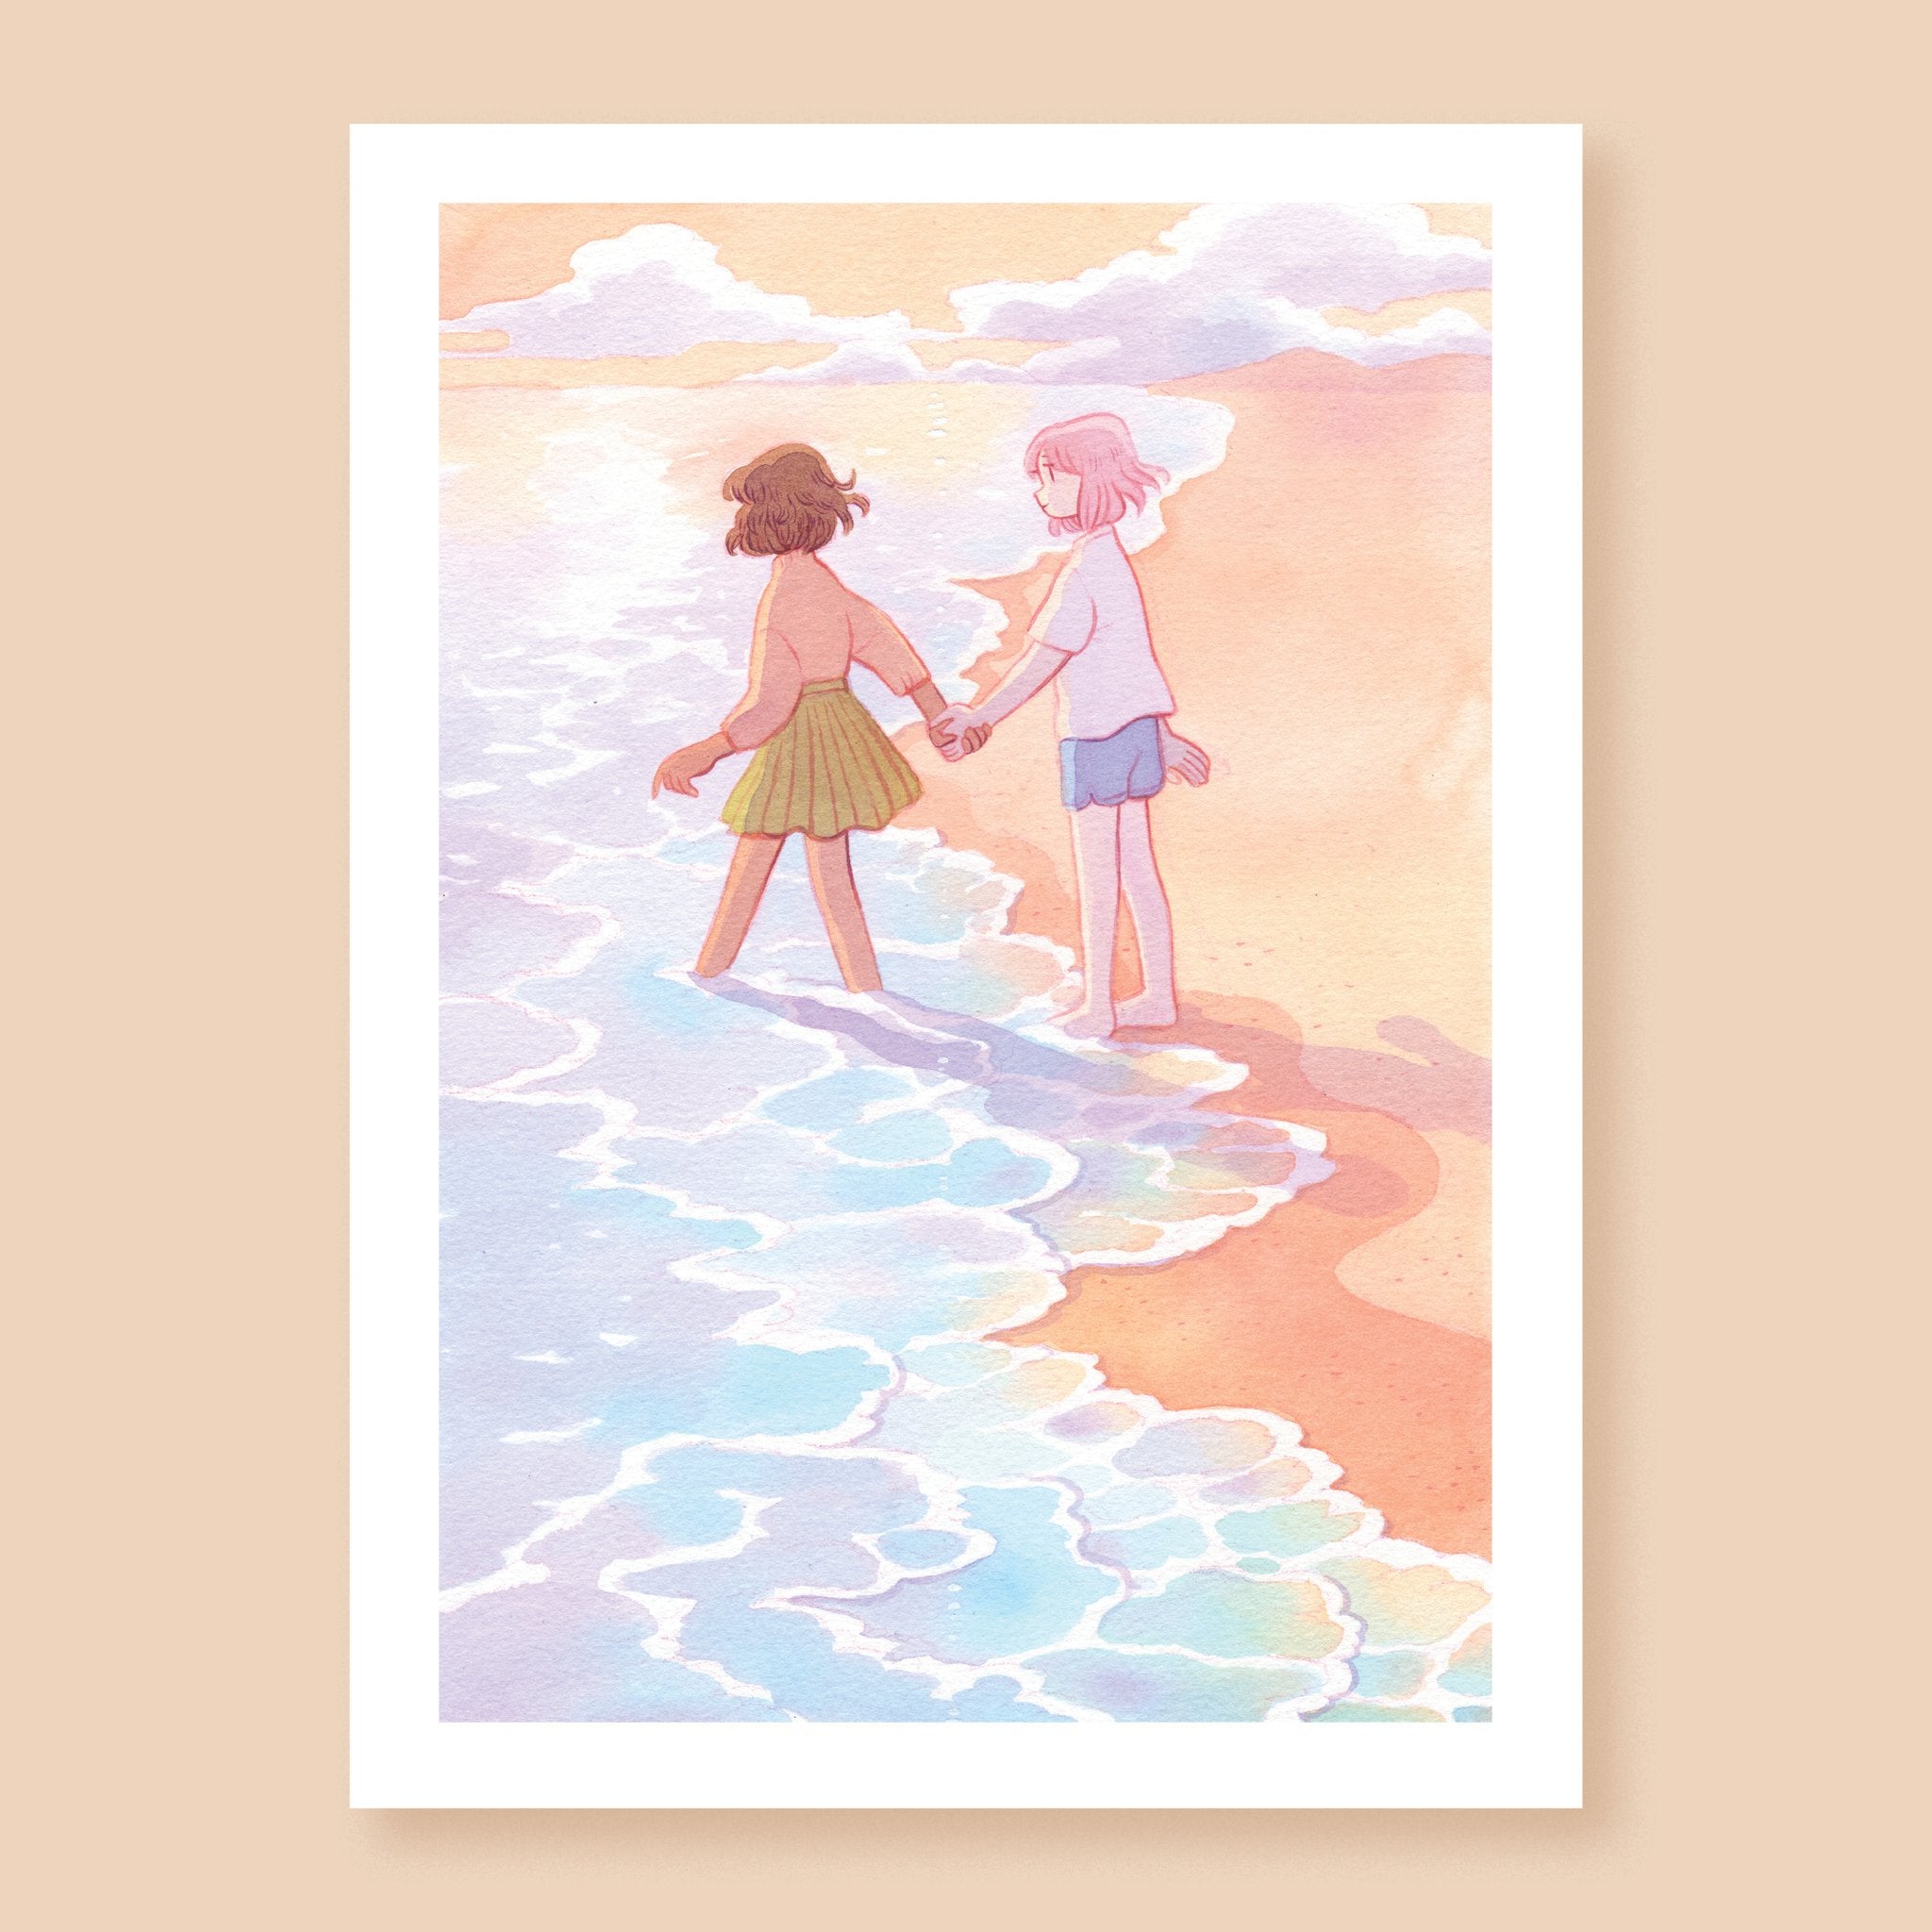 Print of a colored ink illustration depicting two characters on the seashore at sunset. The scene is lit brightly and warmly, and the characters are walking towards the water holding hands, with the character on the left leading the character on the right.